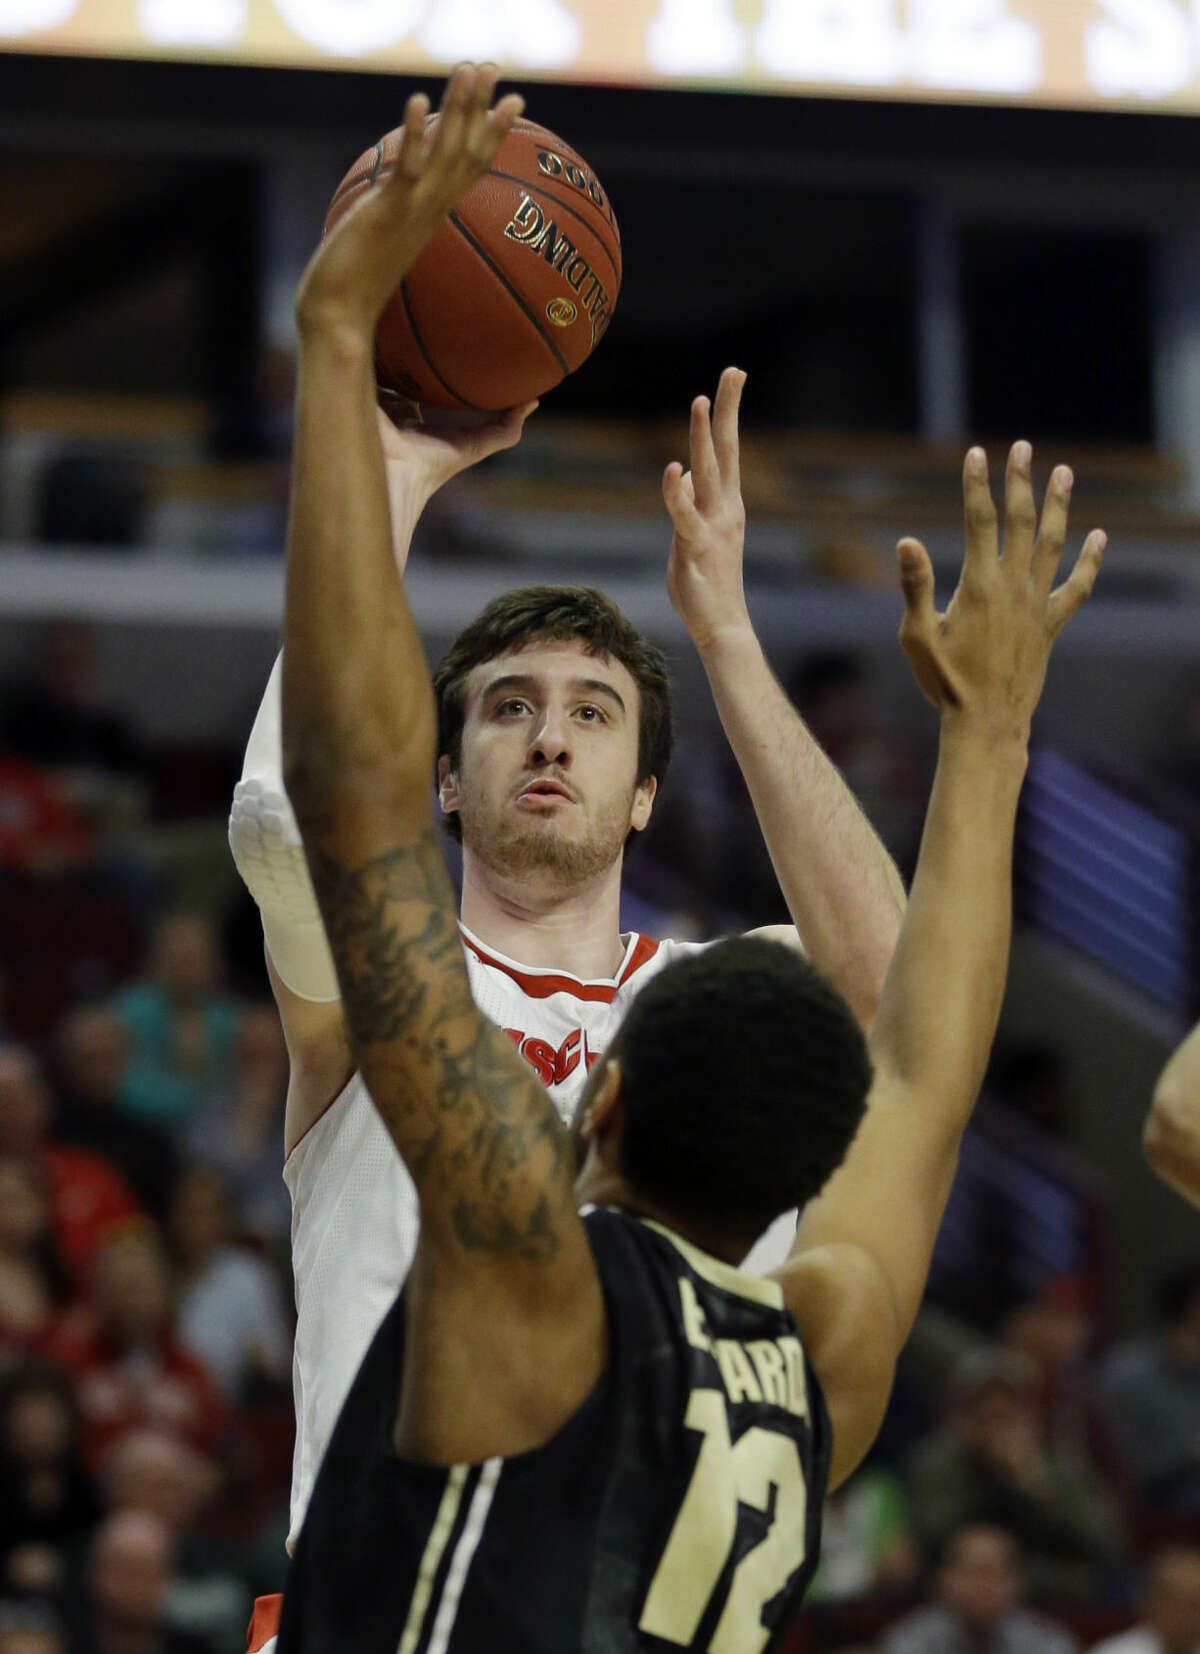 Wisconsin's Frank Kaminsky (44) shoots over Purdue's Vince Edwards (12) in the first half of an NCAA college basketball game in the semifinals of the Big Ten Conference tournament in Chicago, Saturday, March 14, 2015. (AP Photo/Michael Conroy)